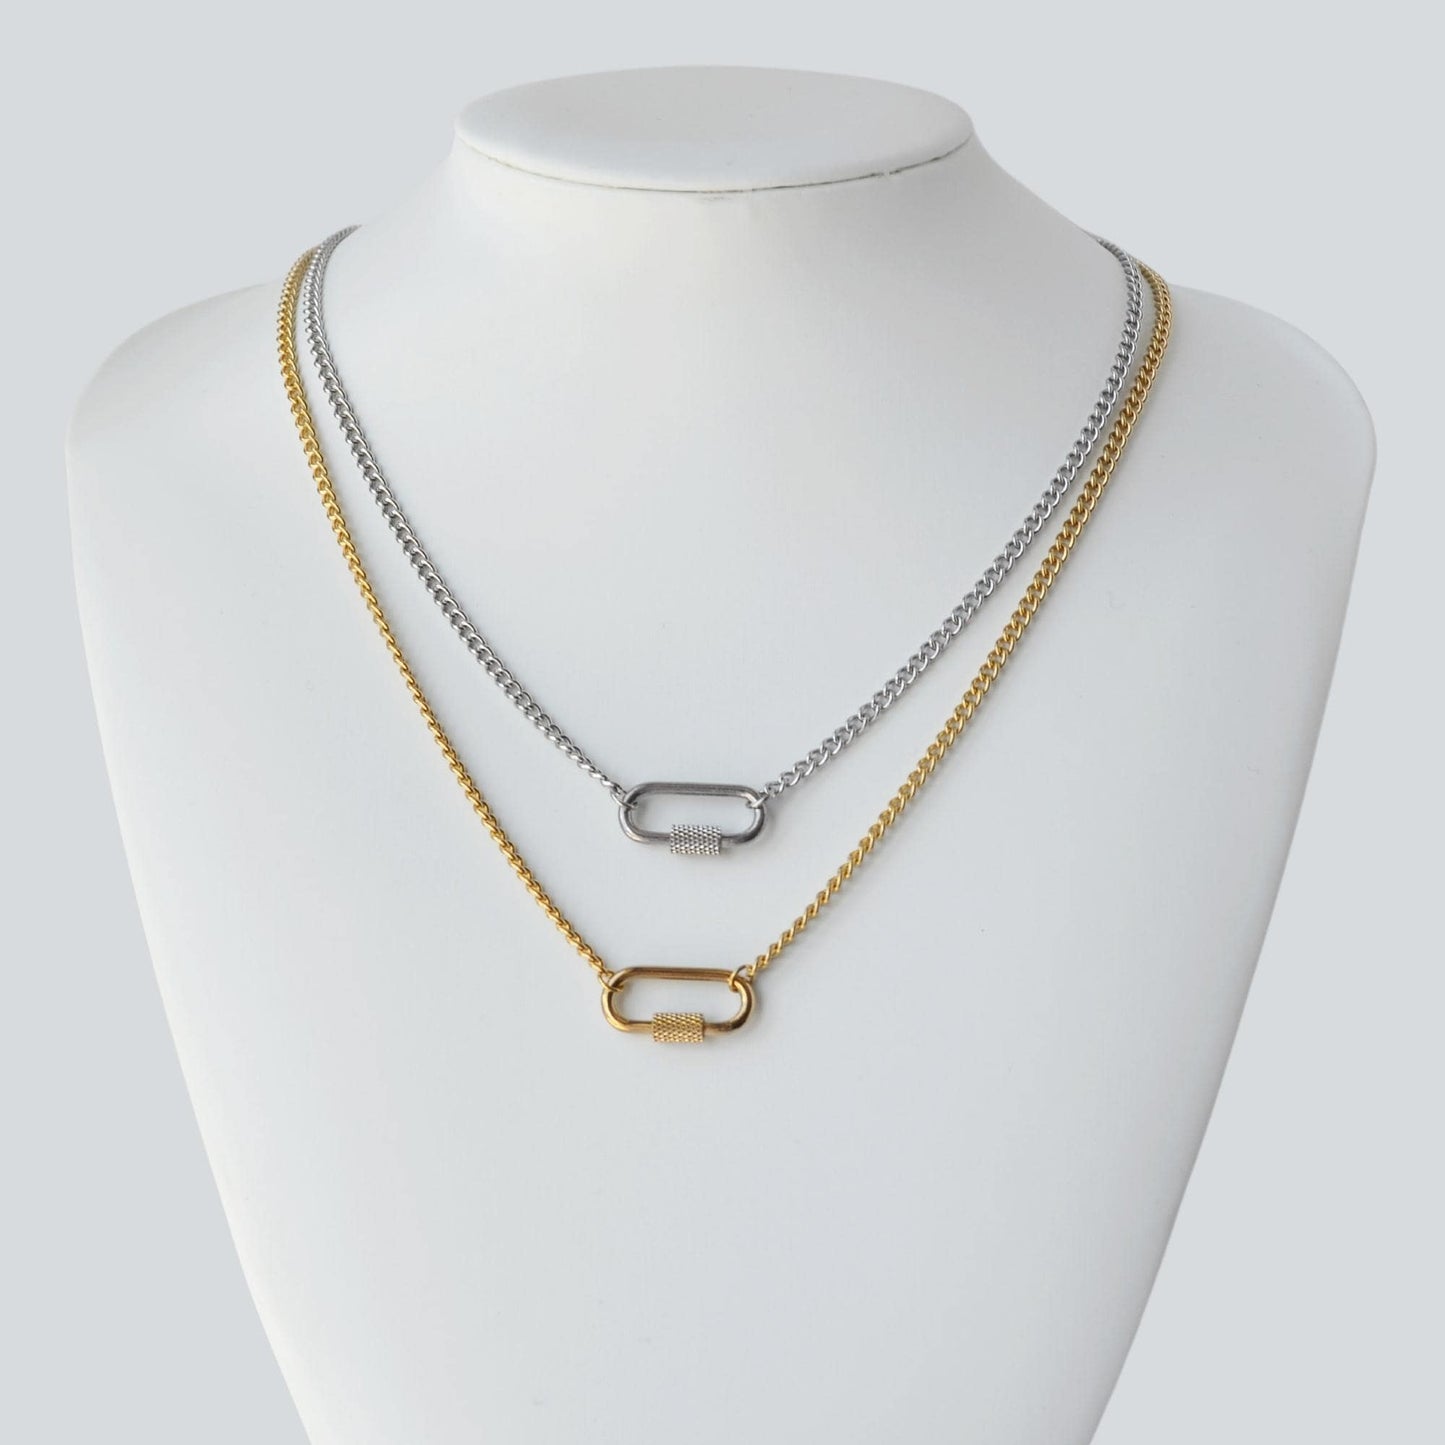 Howard's Dainty Silver and Gold 16 Carabiner Necklace for Women